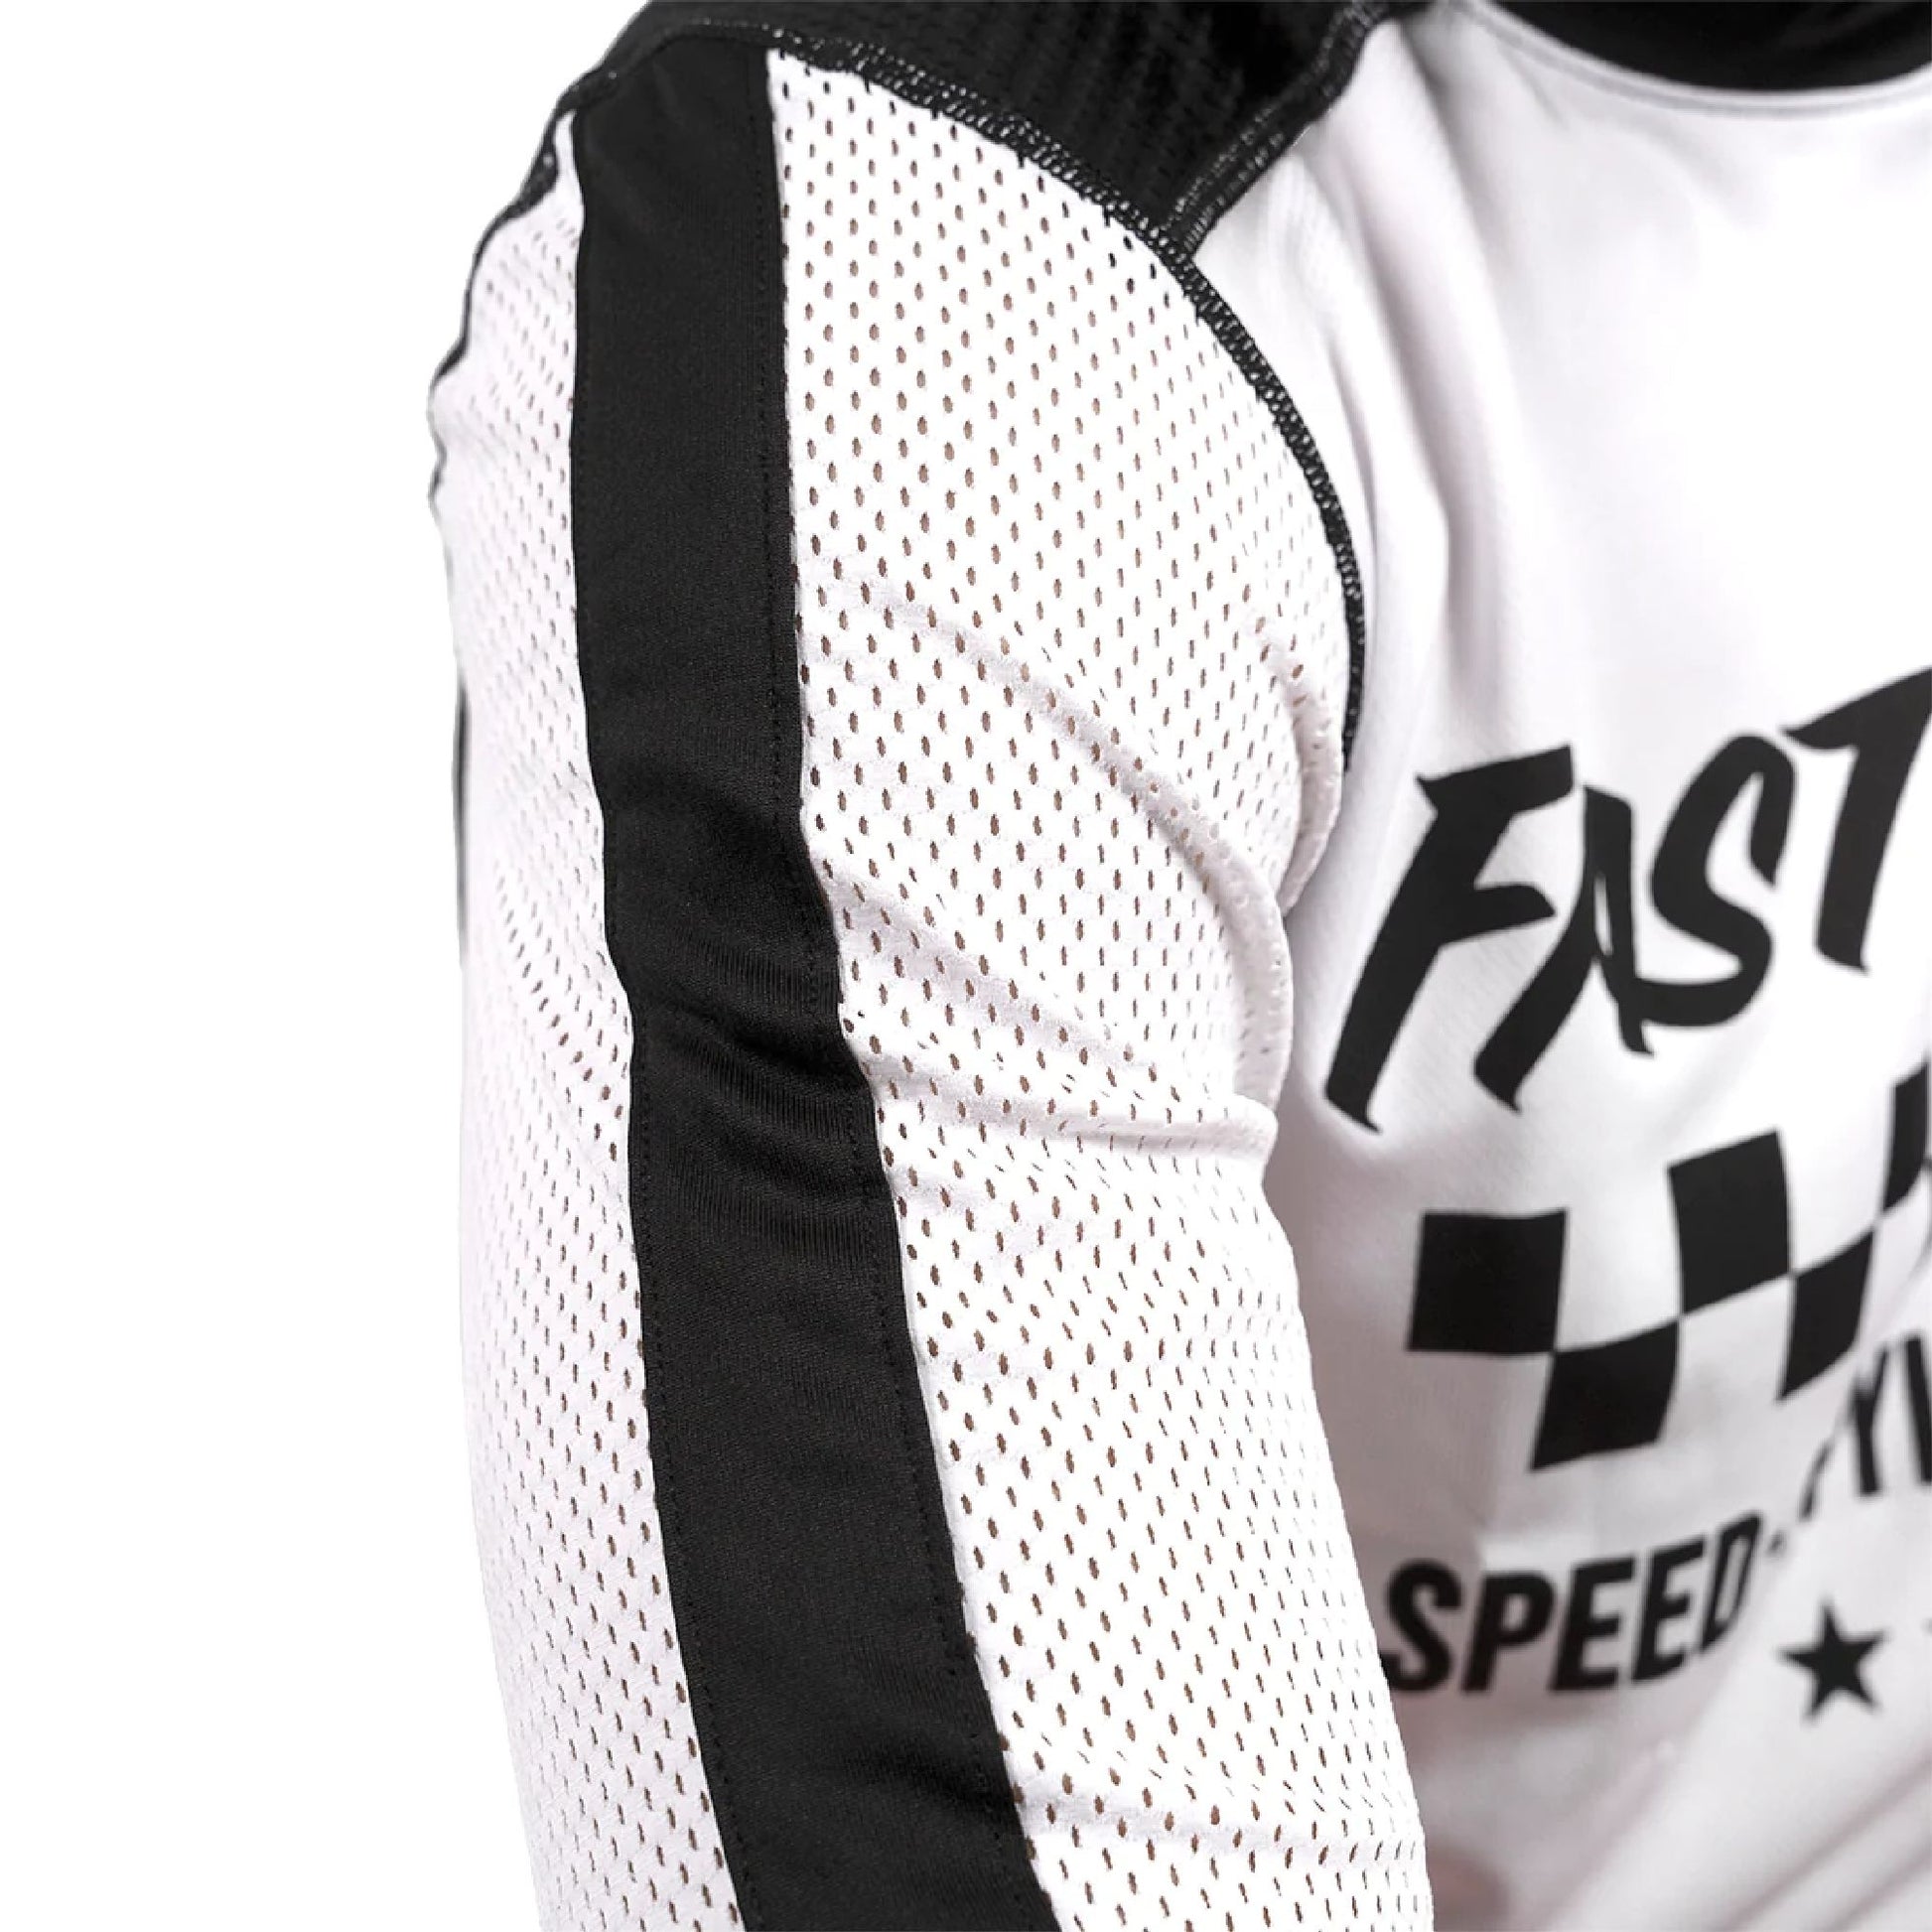 Fasthouse Youth USA Originals Air Cooled Jersey White Black - Fasthouse Bike Jerseys